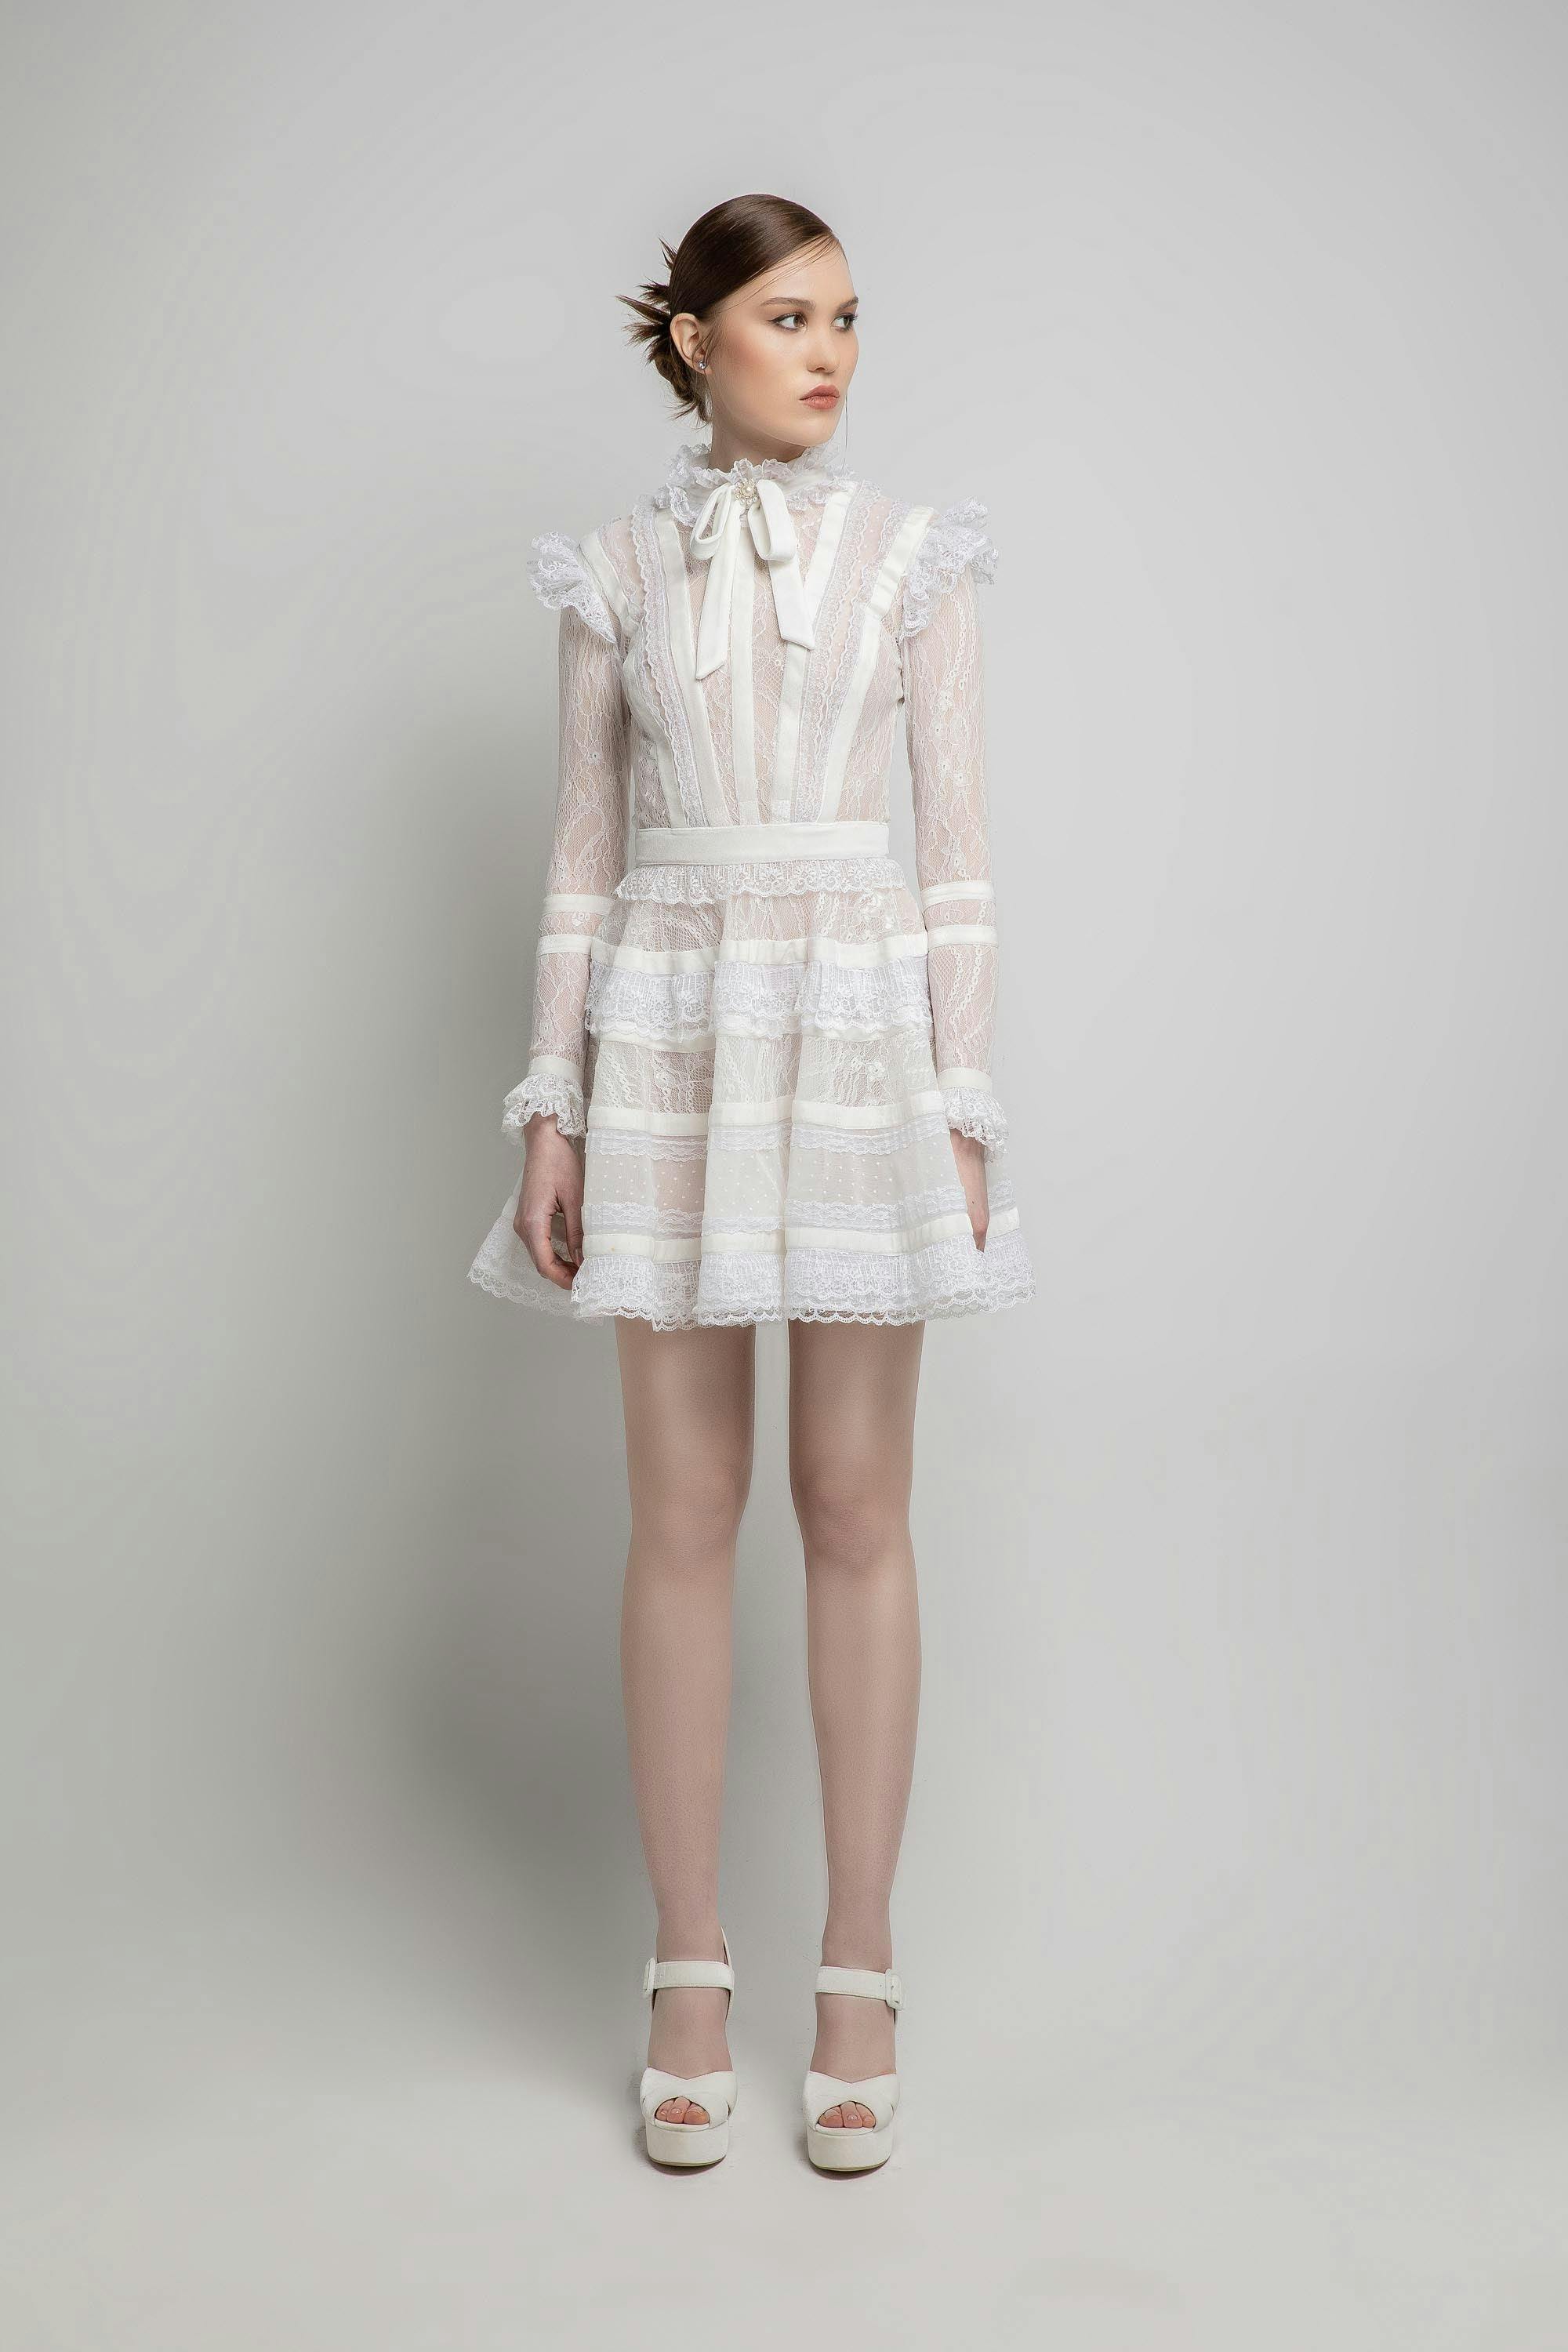 Look 20 - Jean fares couture - JFC- white lace cocktail dress